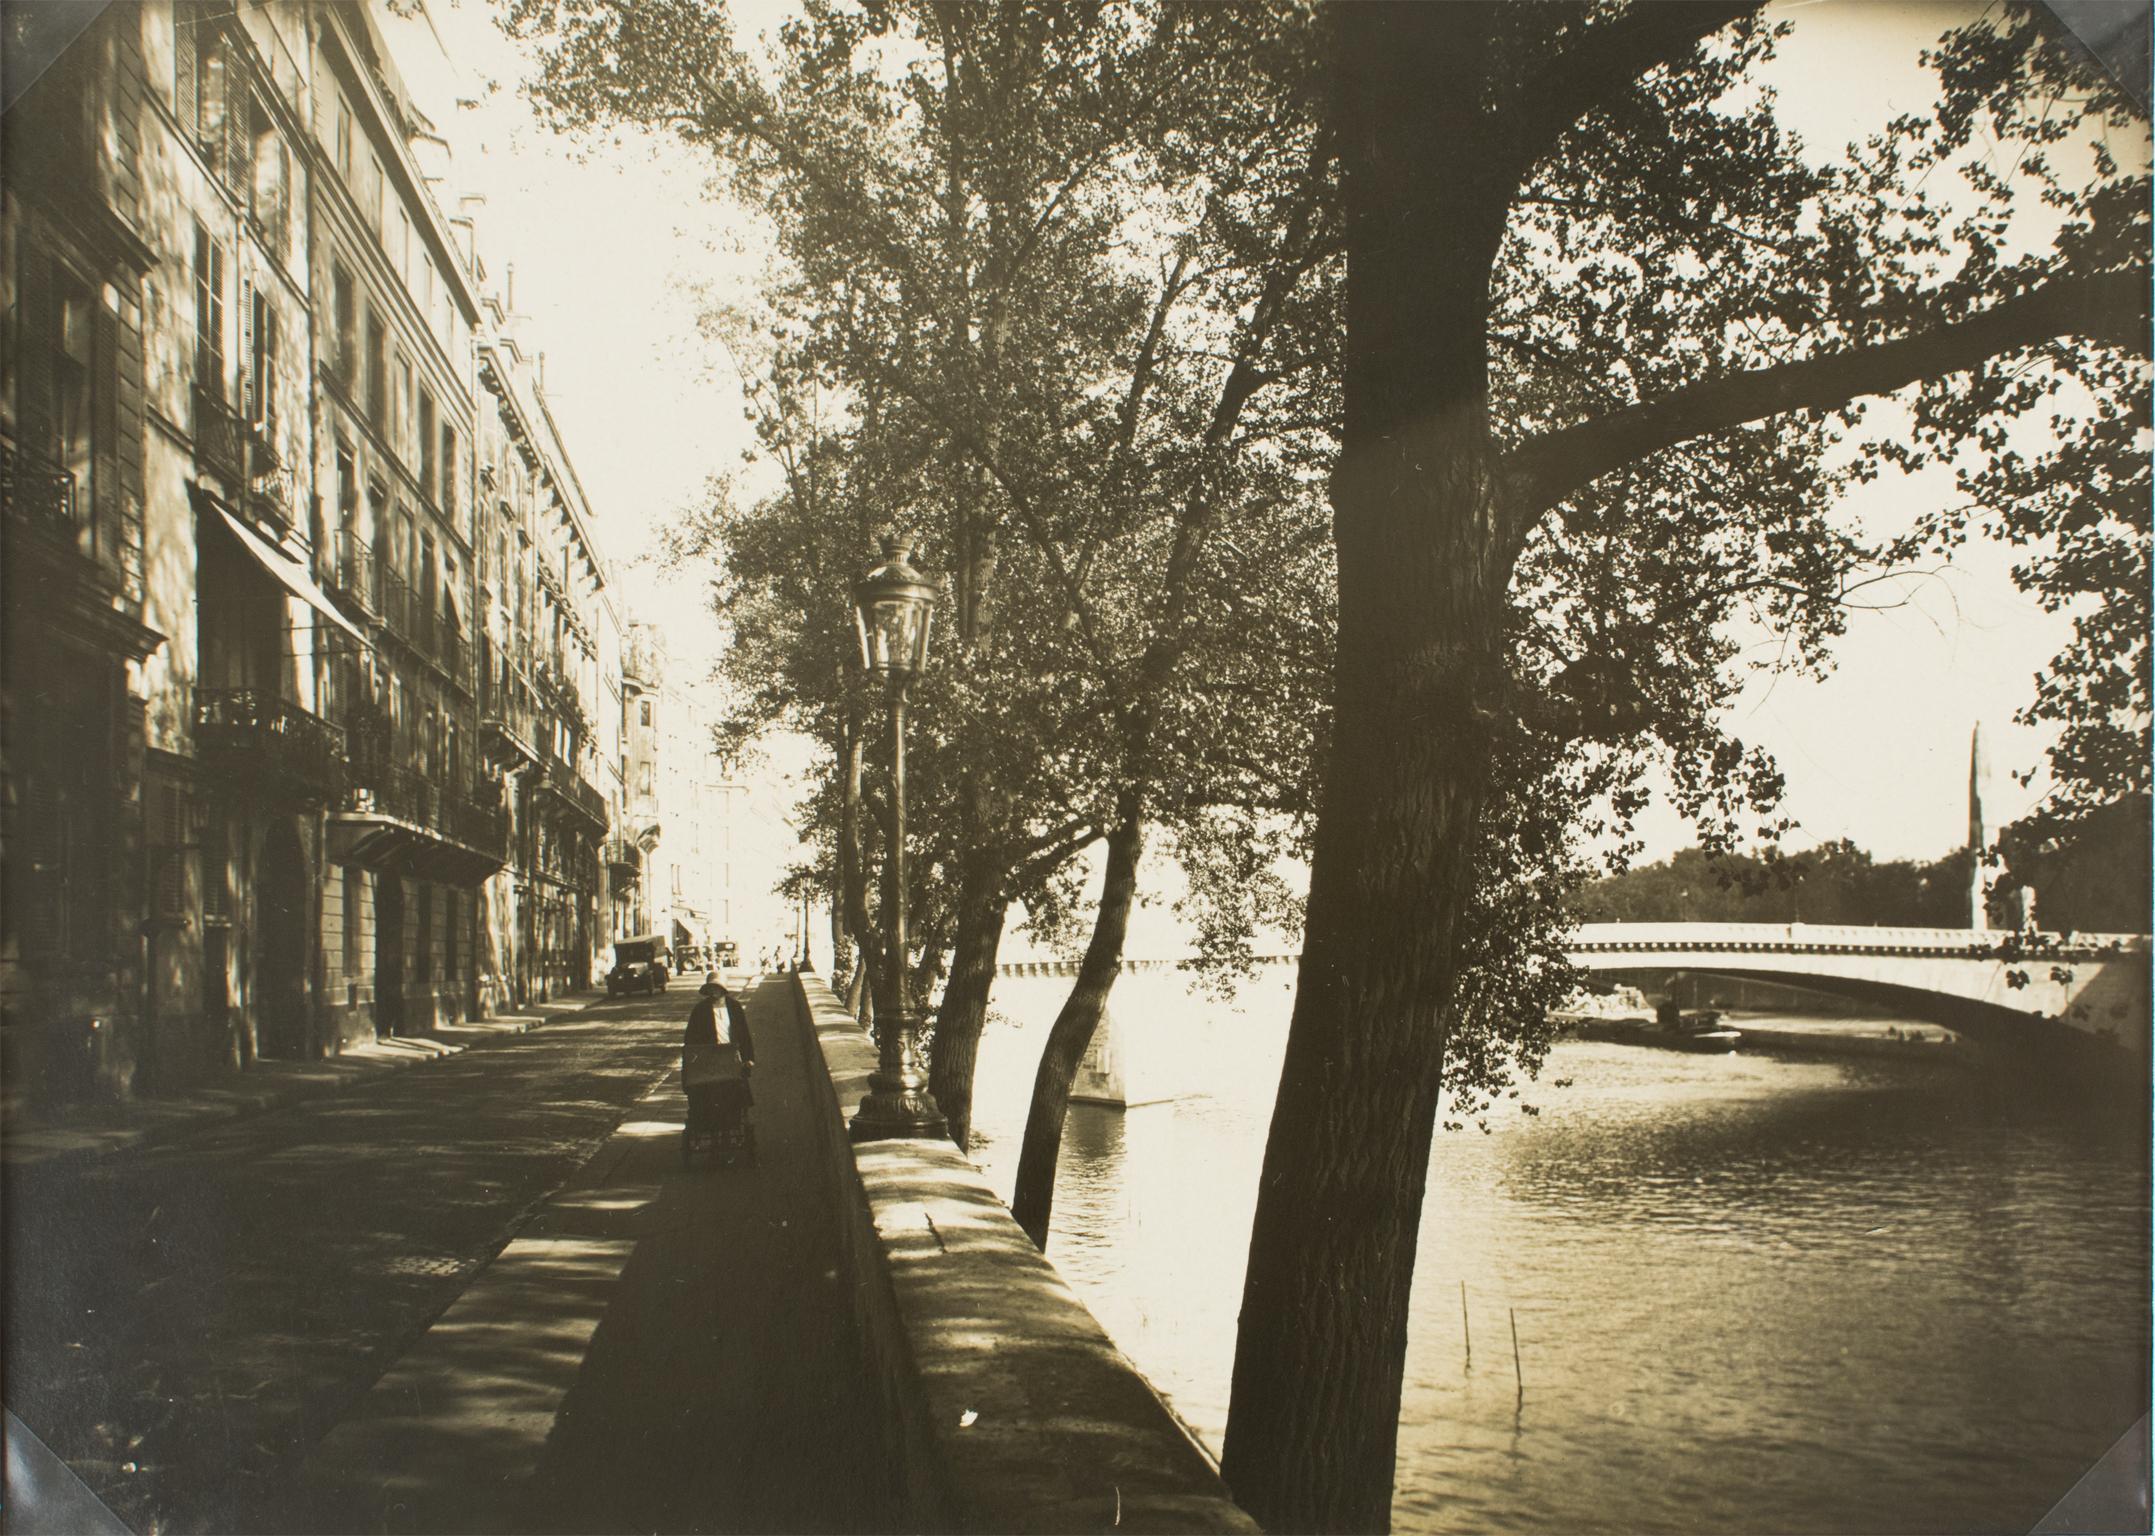 A unique original silver gelatin black and white photograph by Press Agency A. Harlingue, Paris. Paris, a view of The Ile Saint Louis, circa 1930.
The view is taken from the Quai d'Orleans in the Ile Saint Louis, and the background on the right side